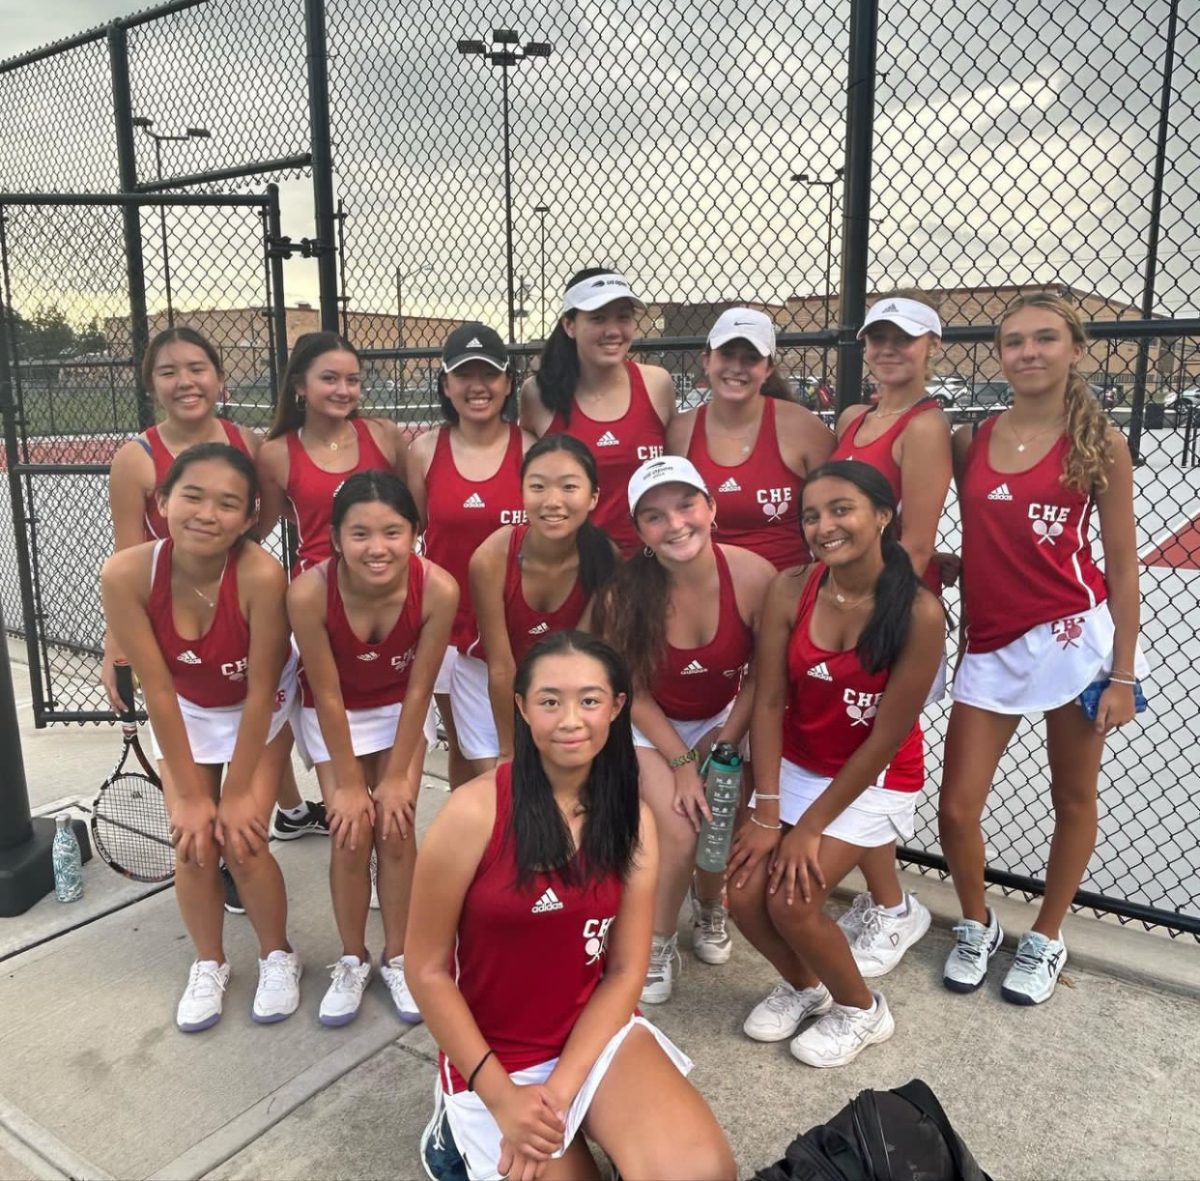 East+girls+tennis+team+poses+for+a+picture+after+their+win+in+the+season+opener.+